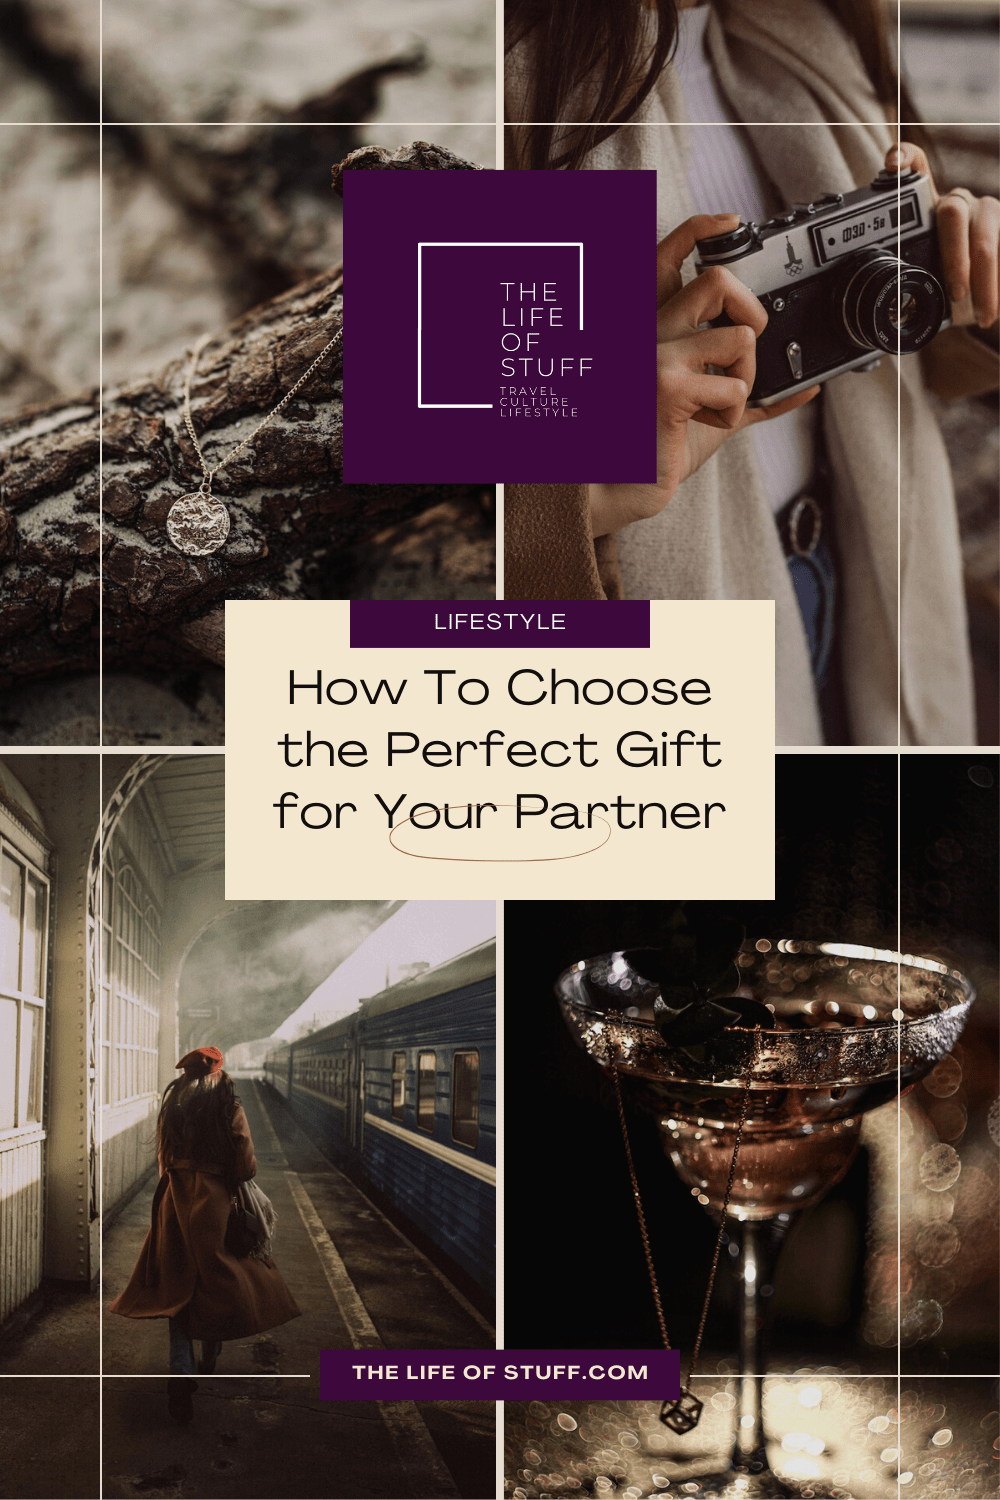 How To Choose the Perfect Gift for Your Partner - The Life of Stuff